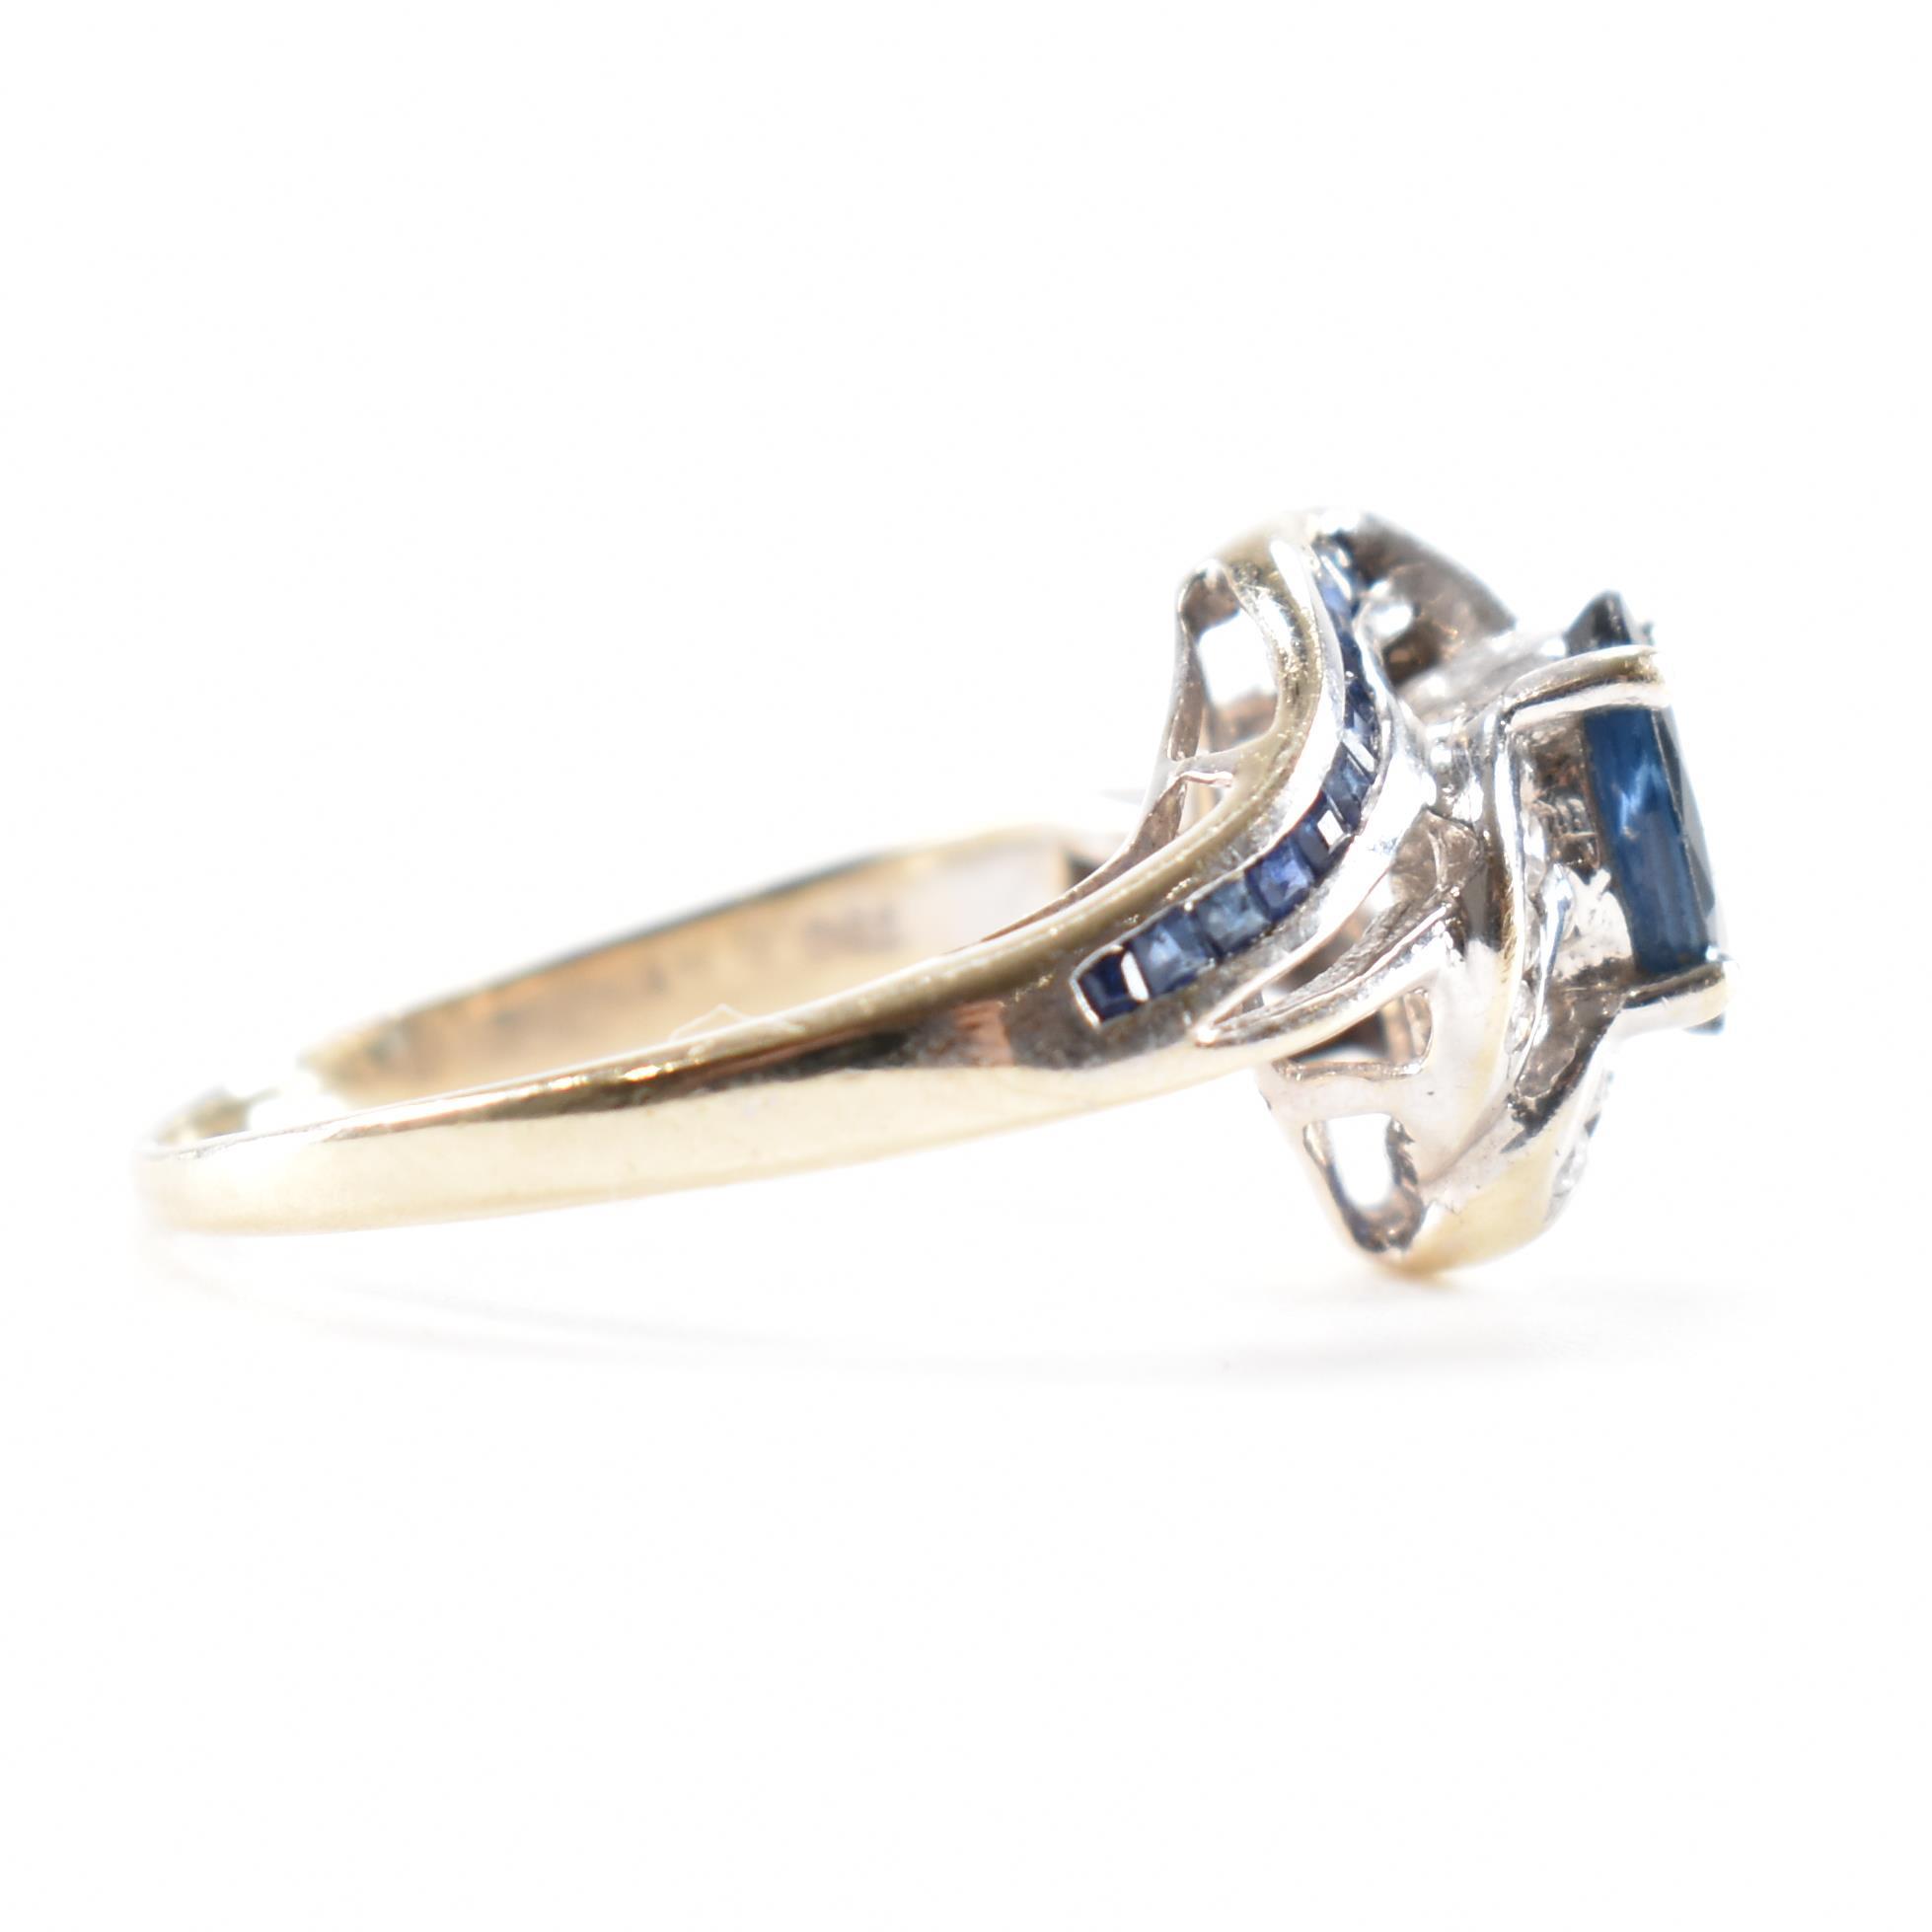 WHITE GOLD SAPPHIRE & DIAMOND CROSSOVER RING - Image 5 of 8